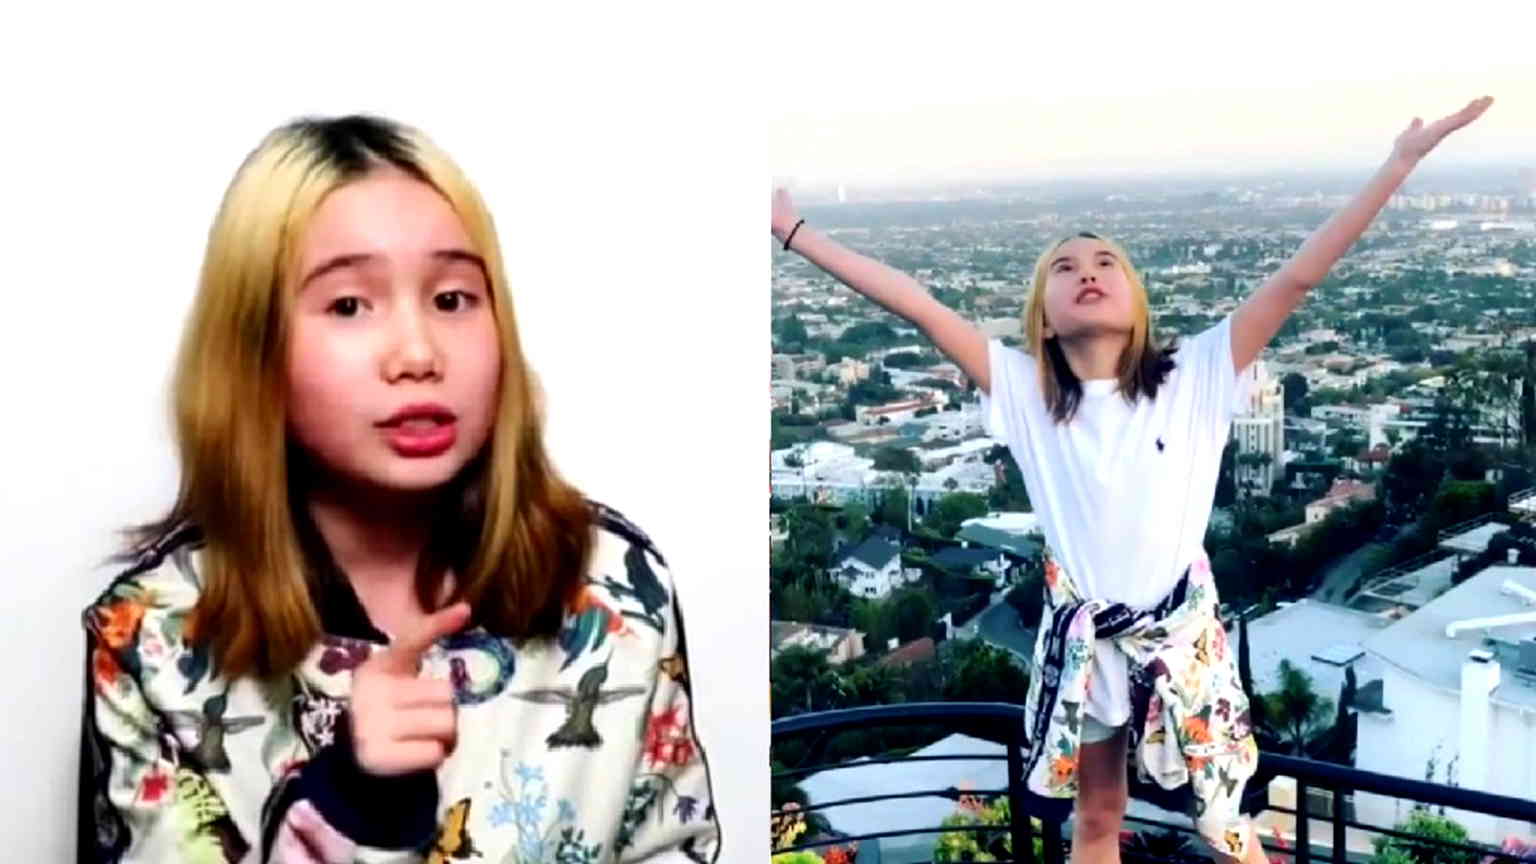 Lil Tay is still alive, claims social media was hacked